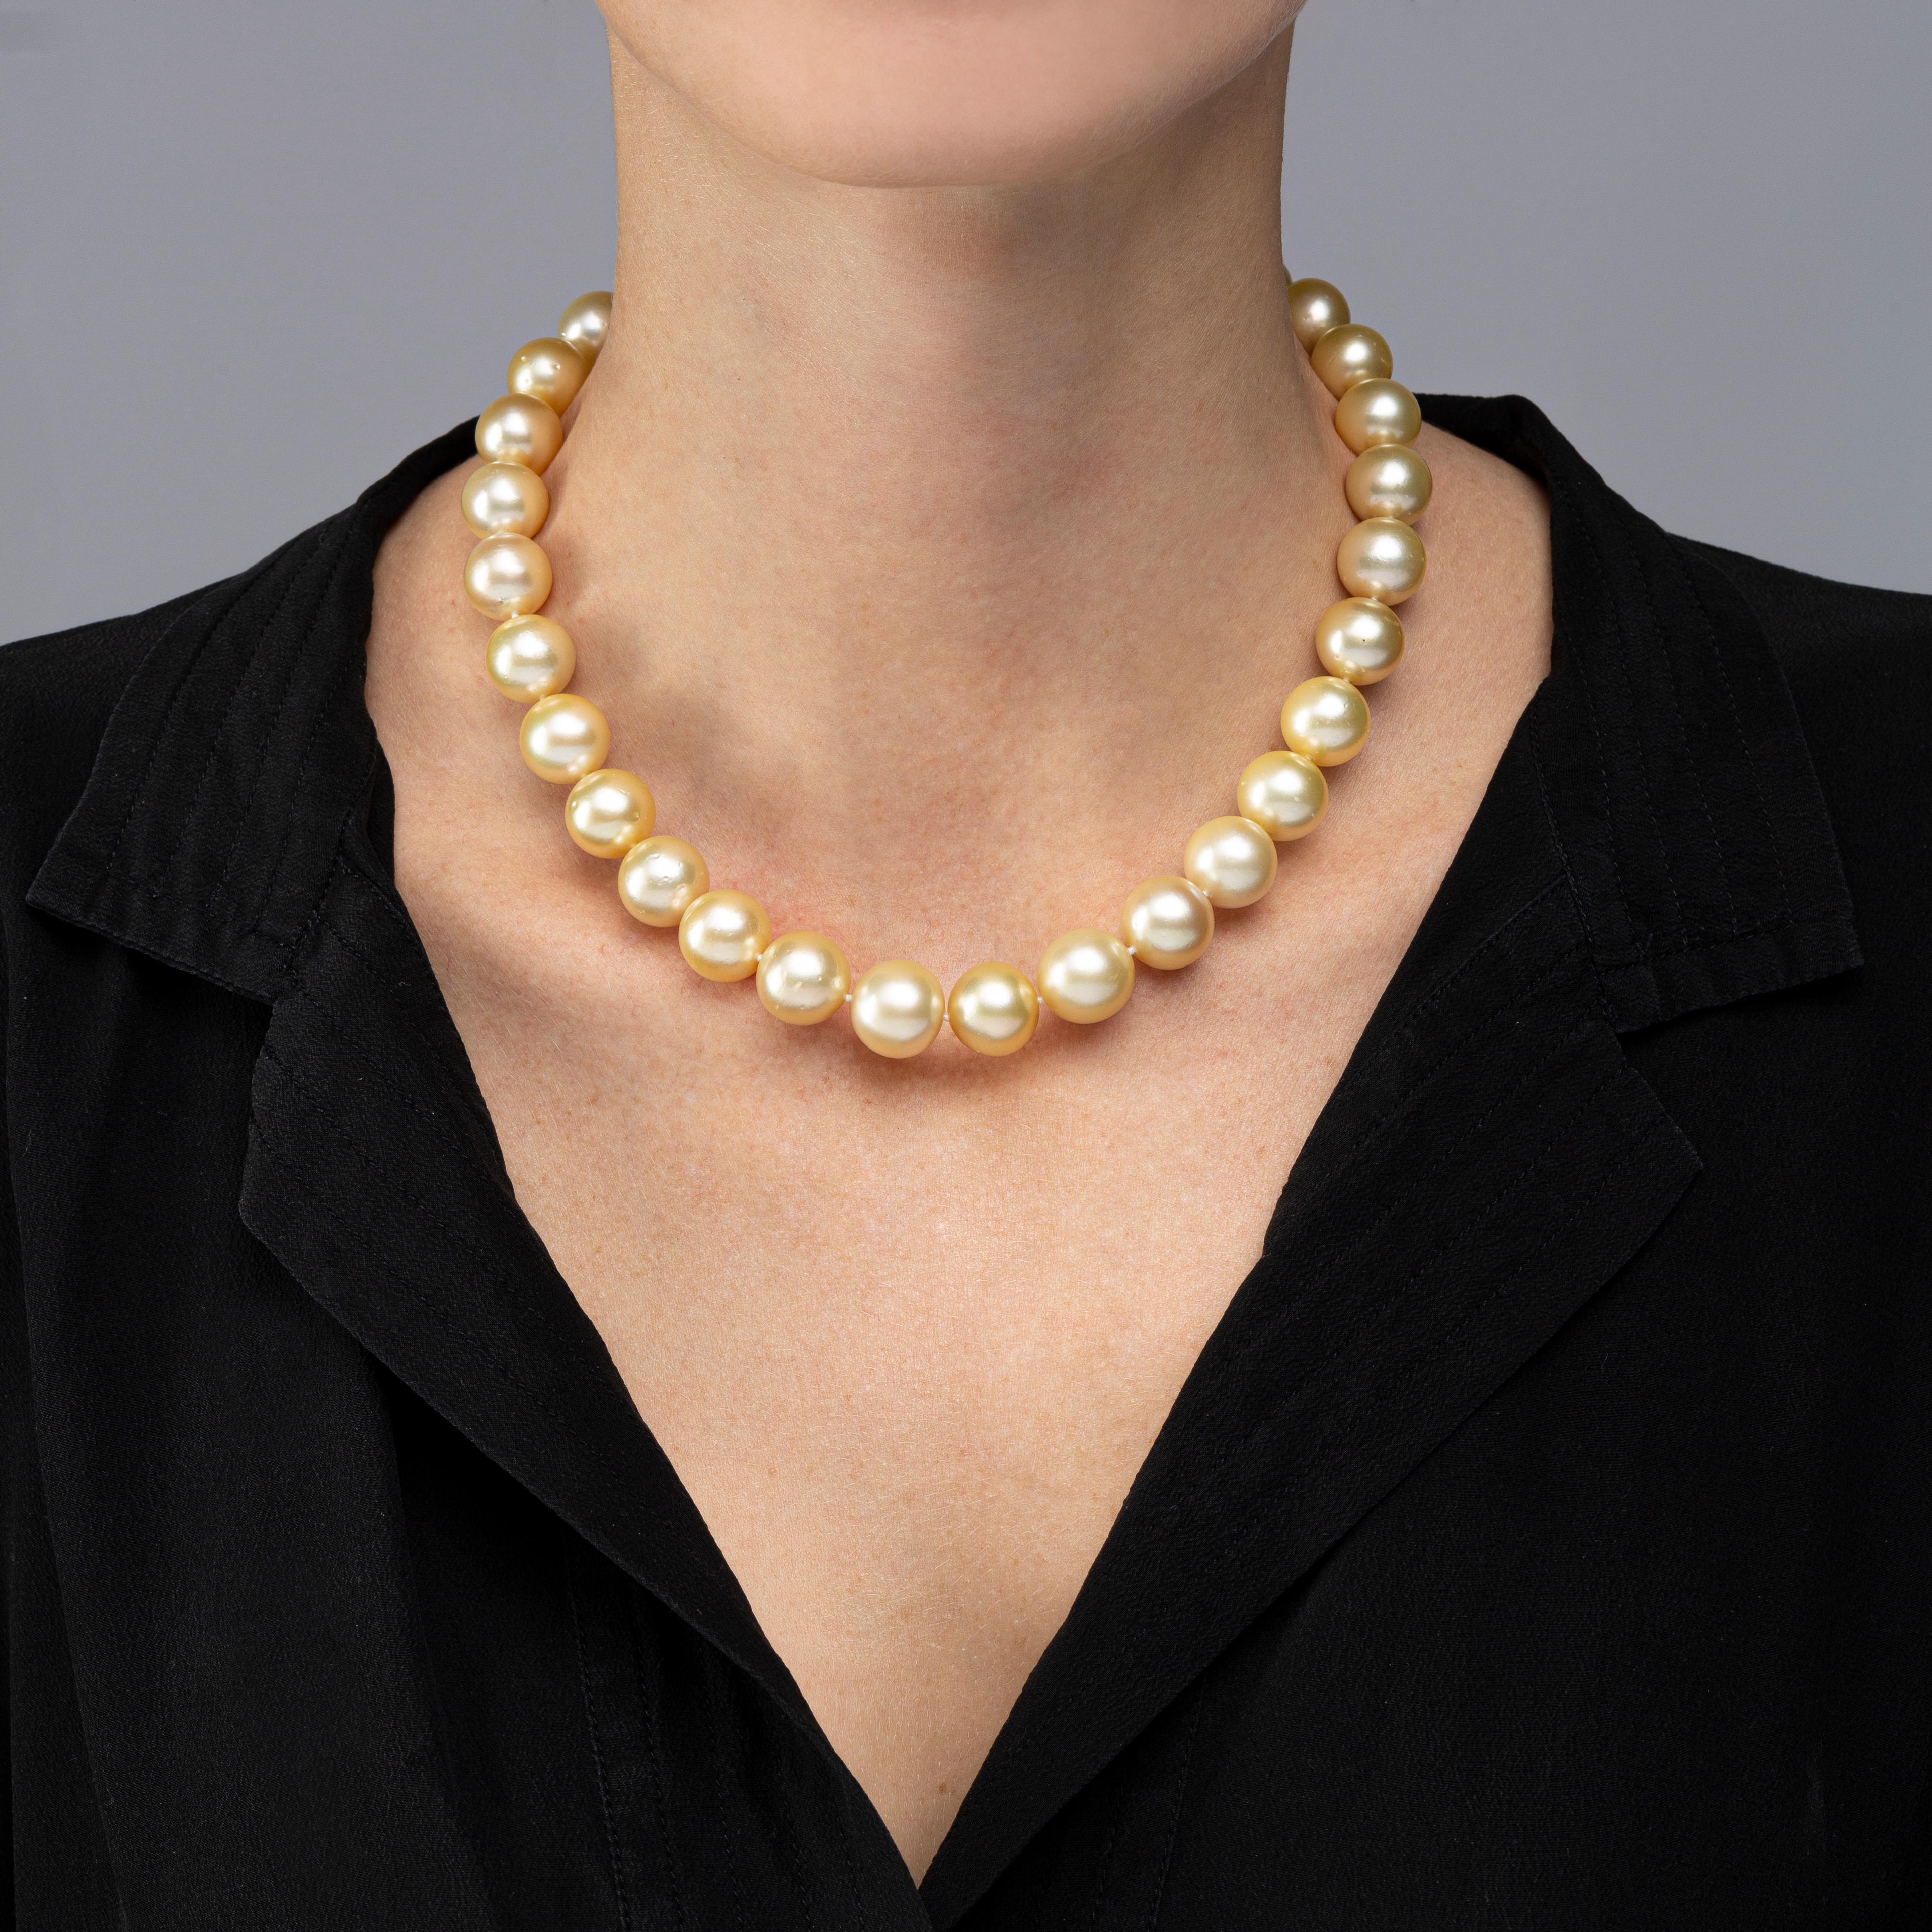 Alex Jona Golden South Sea pearl necklace, composed of 31 cultured pearls ranging from 10.7 to 13.7mm in diameter, total length: 17.5 inch/44.5 cm, strung on a hand-knotted silk cord and secured by a hand crafted three tone 18K gold clasp. 

Alex